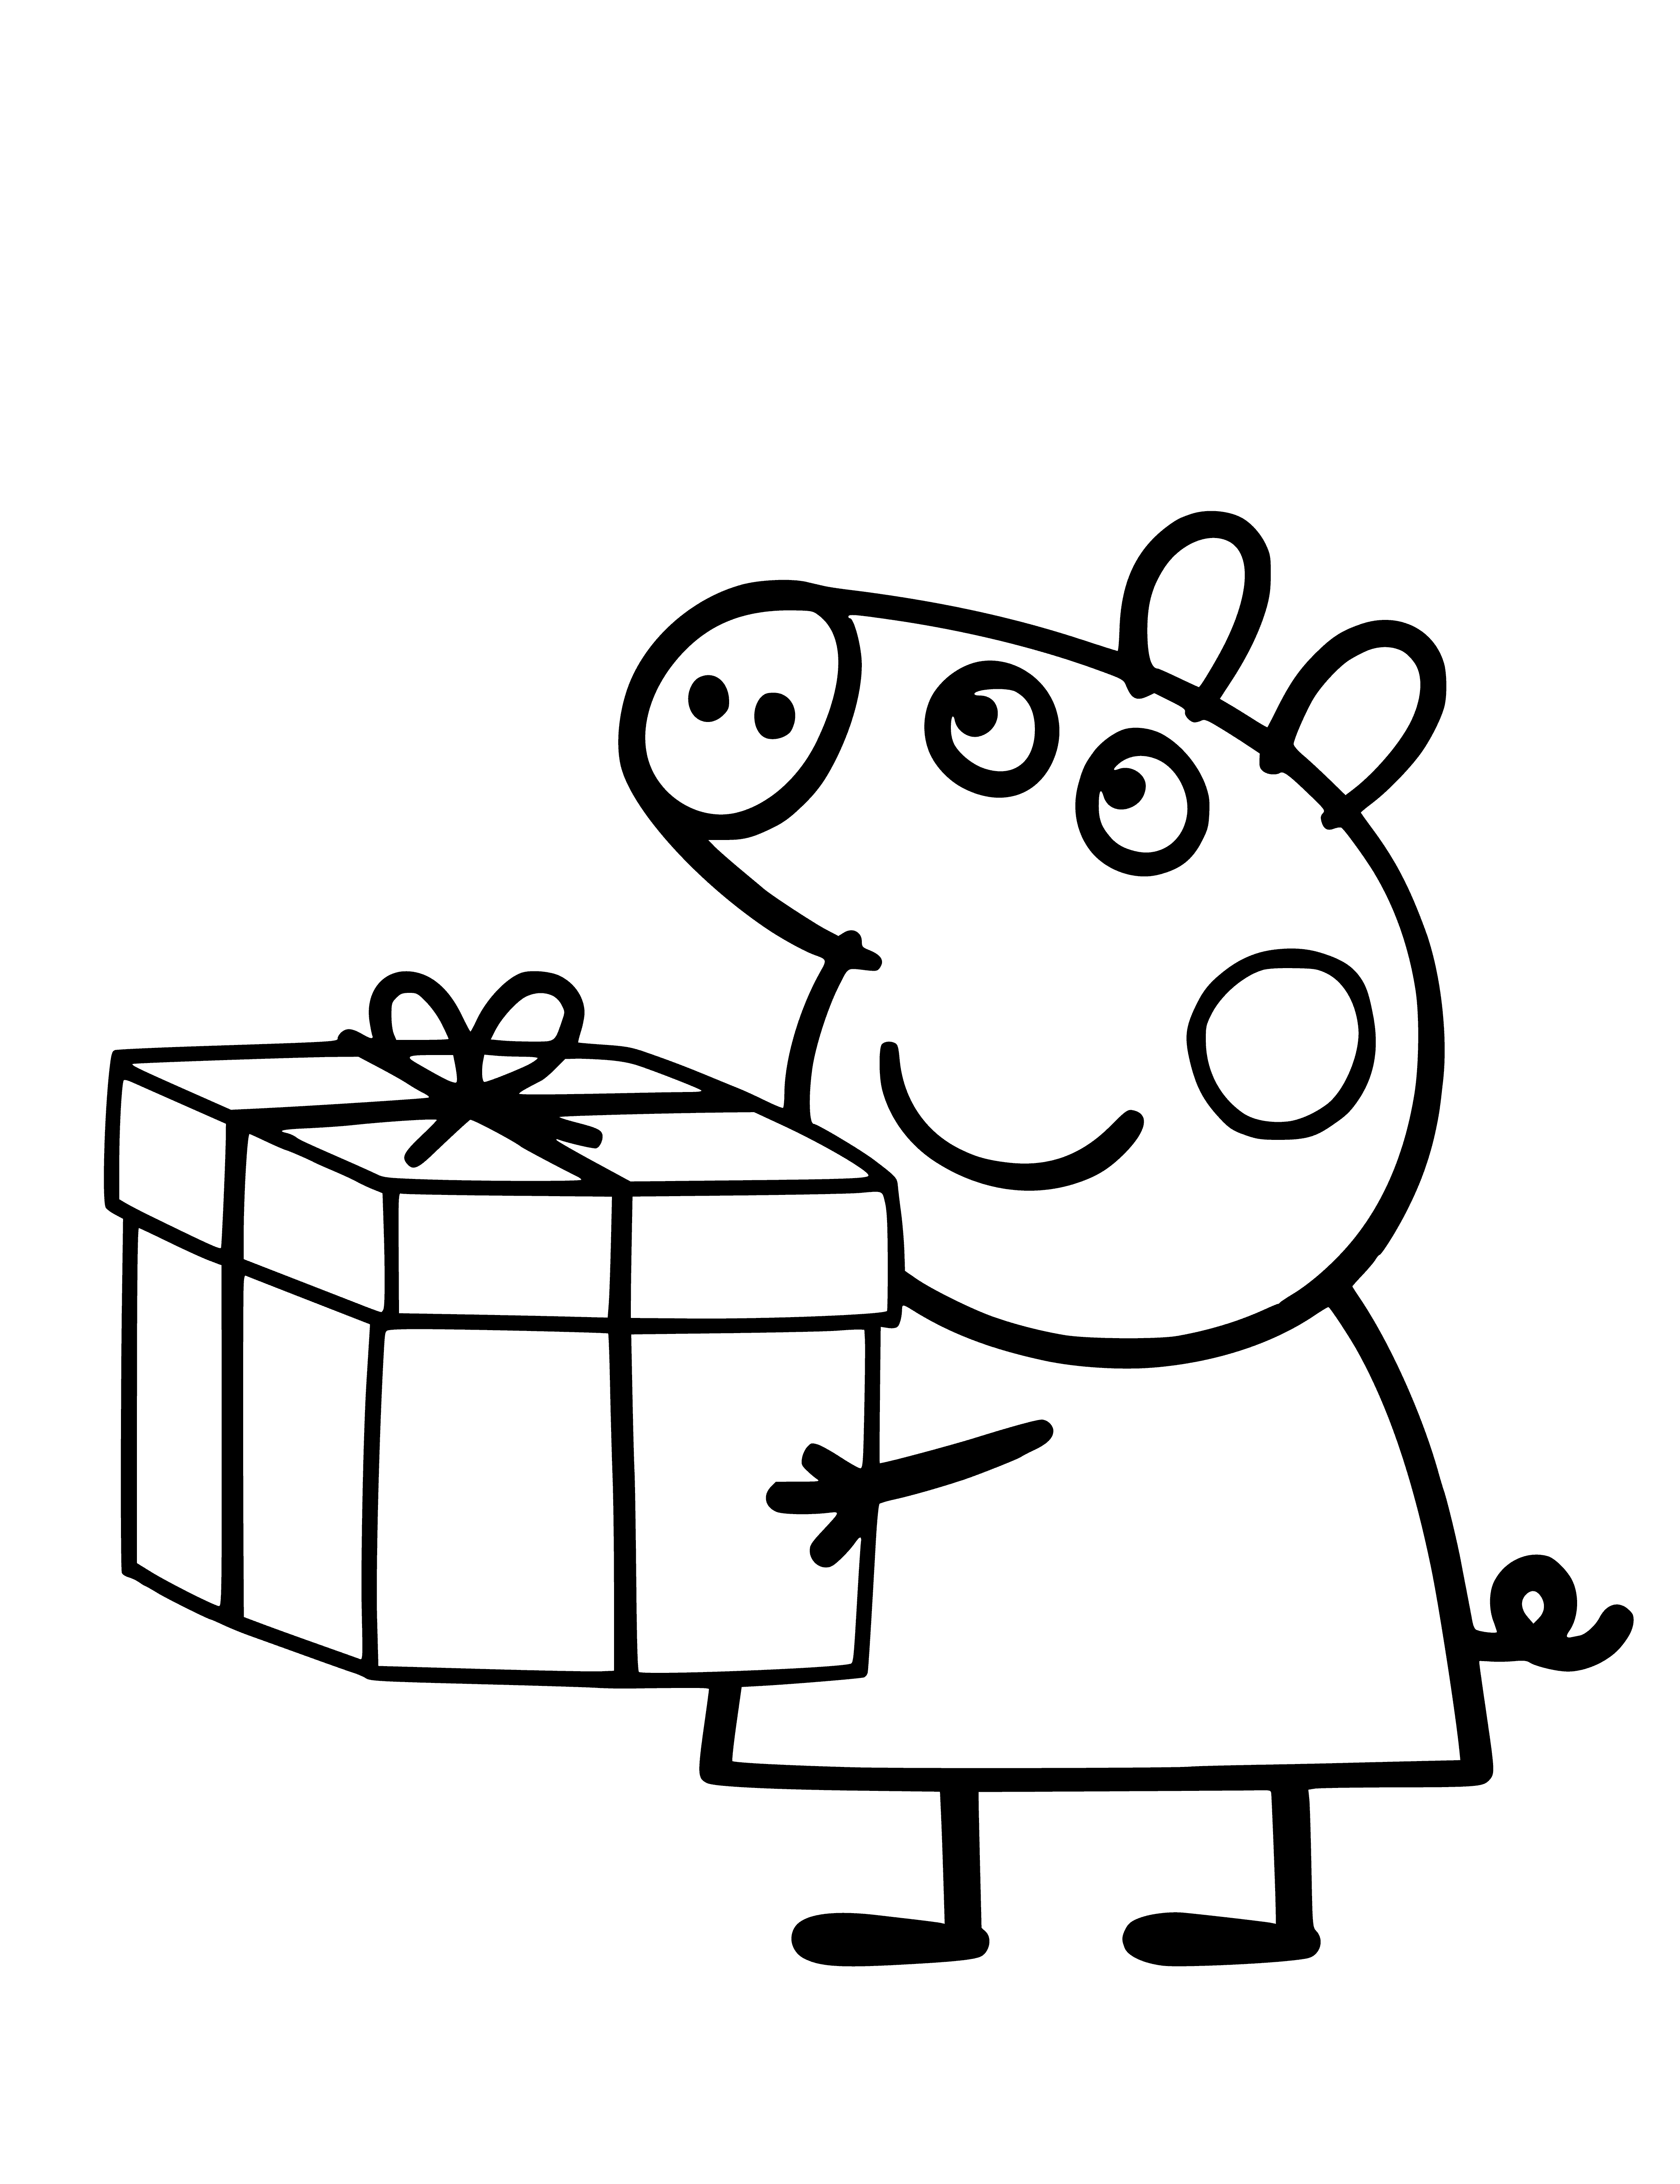 Peppa Pig with a gift coloring page